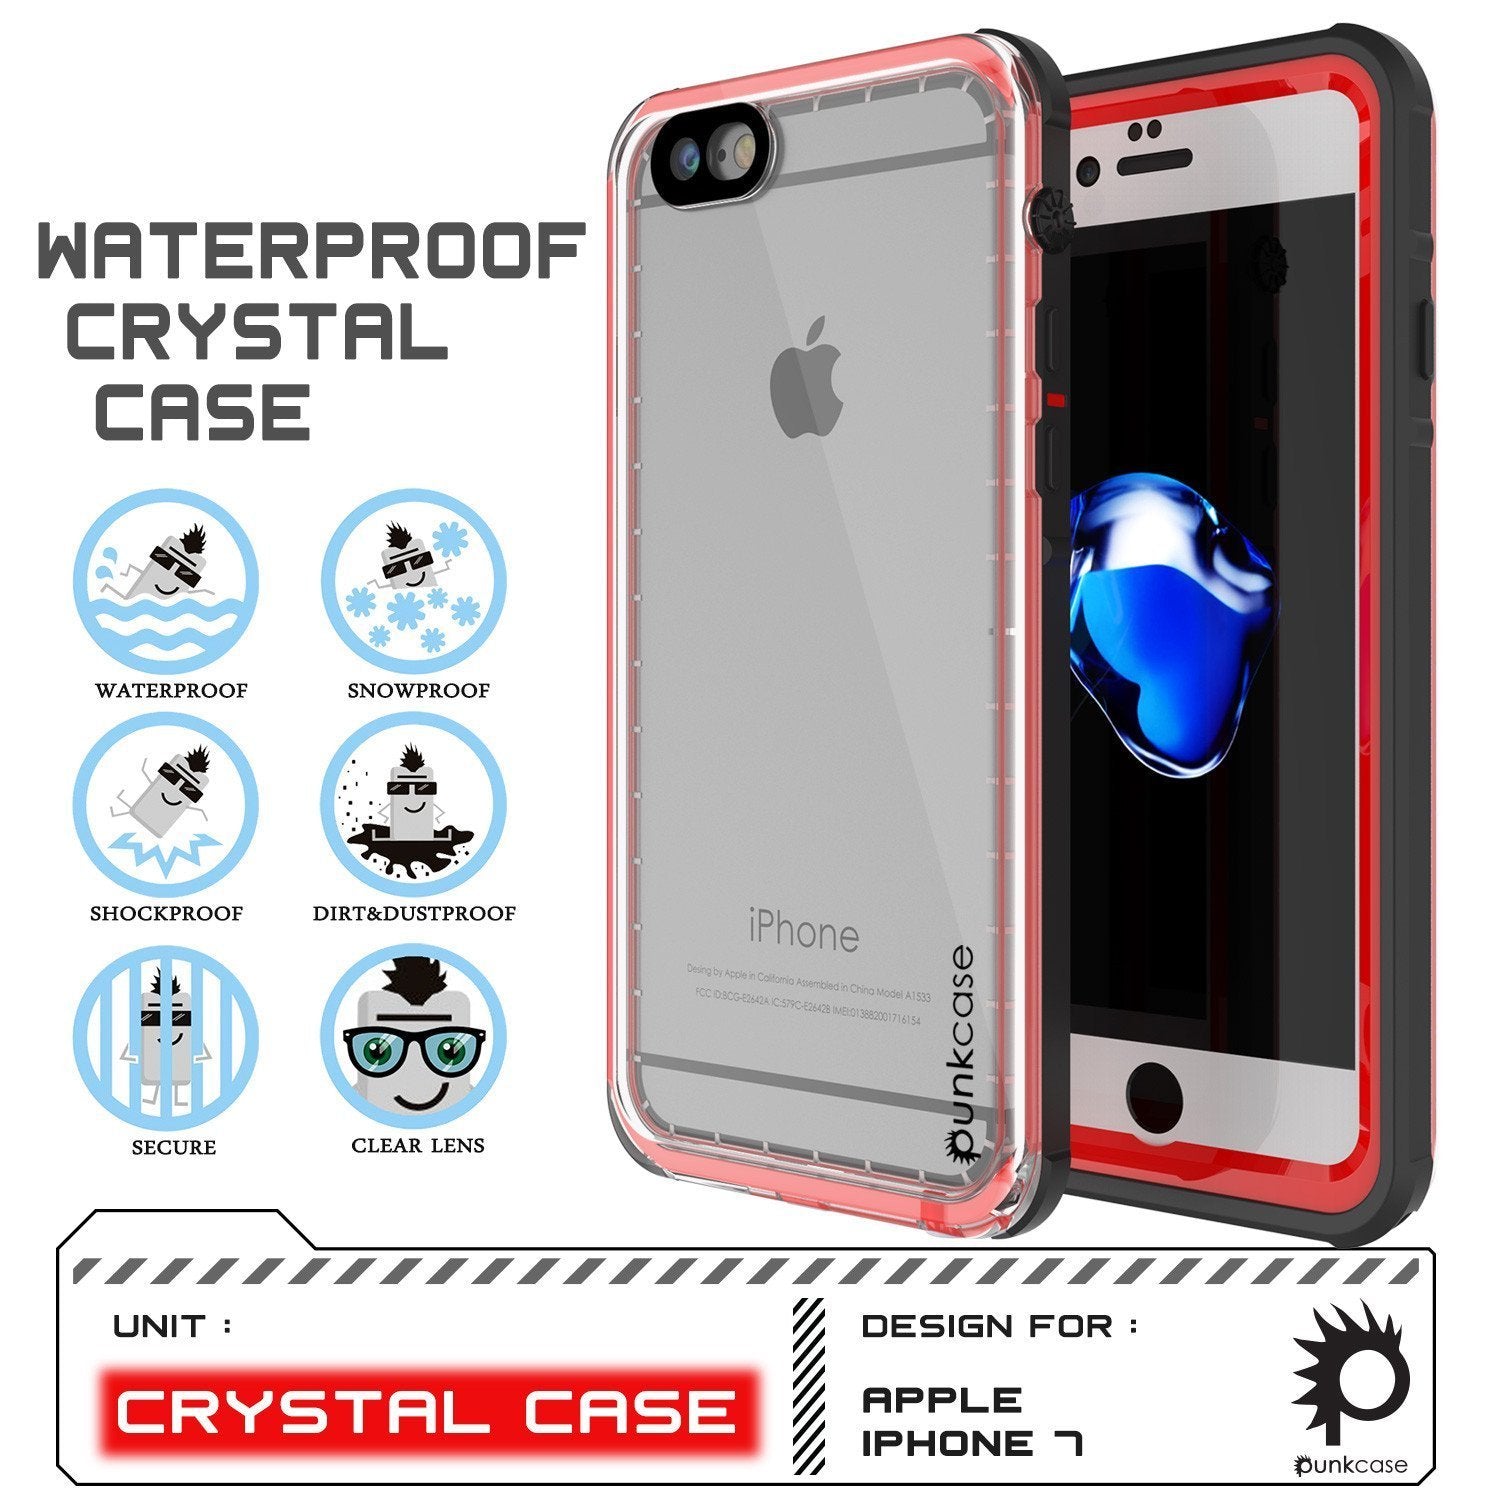 Apple iPhone SE (4.7") Waterproof Case, PUNKcase CRYSTAL Red W/ Attached Screen Protector  | Warranty